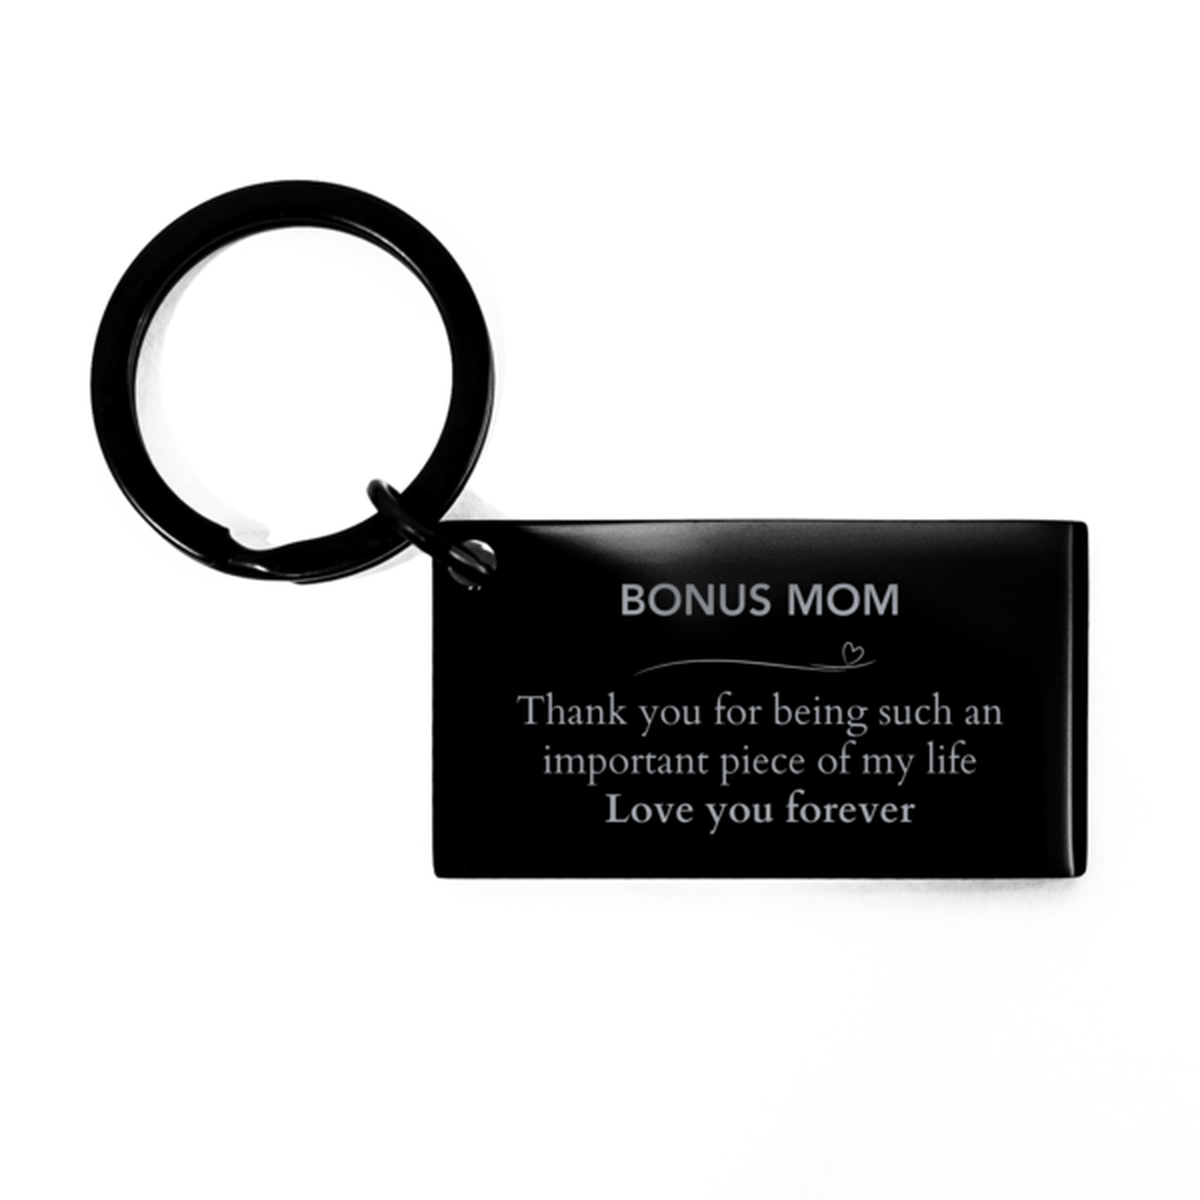 Appropriate Bonus Mom Keychain Epic Birthday Gifts for Bonus Mom Thank you for being such an important piece of my life Bonus Mom Christmas Mothers Fathers Day